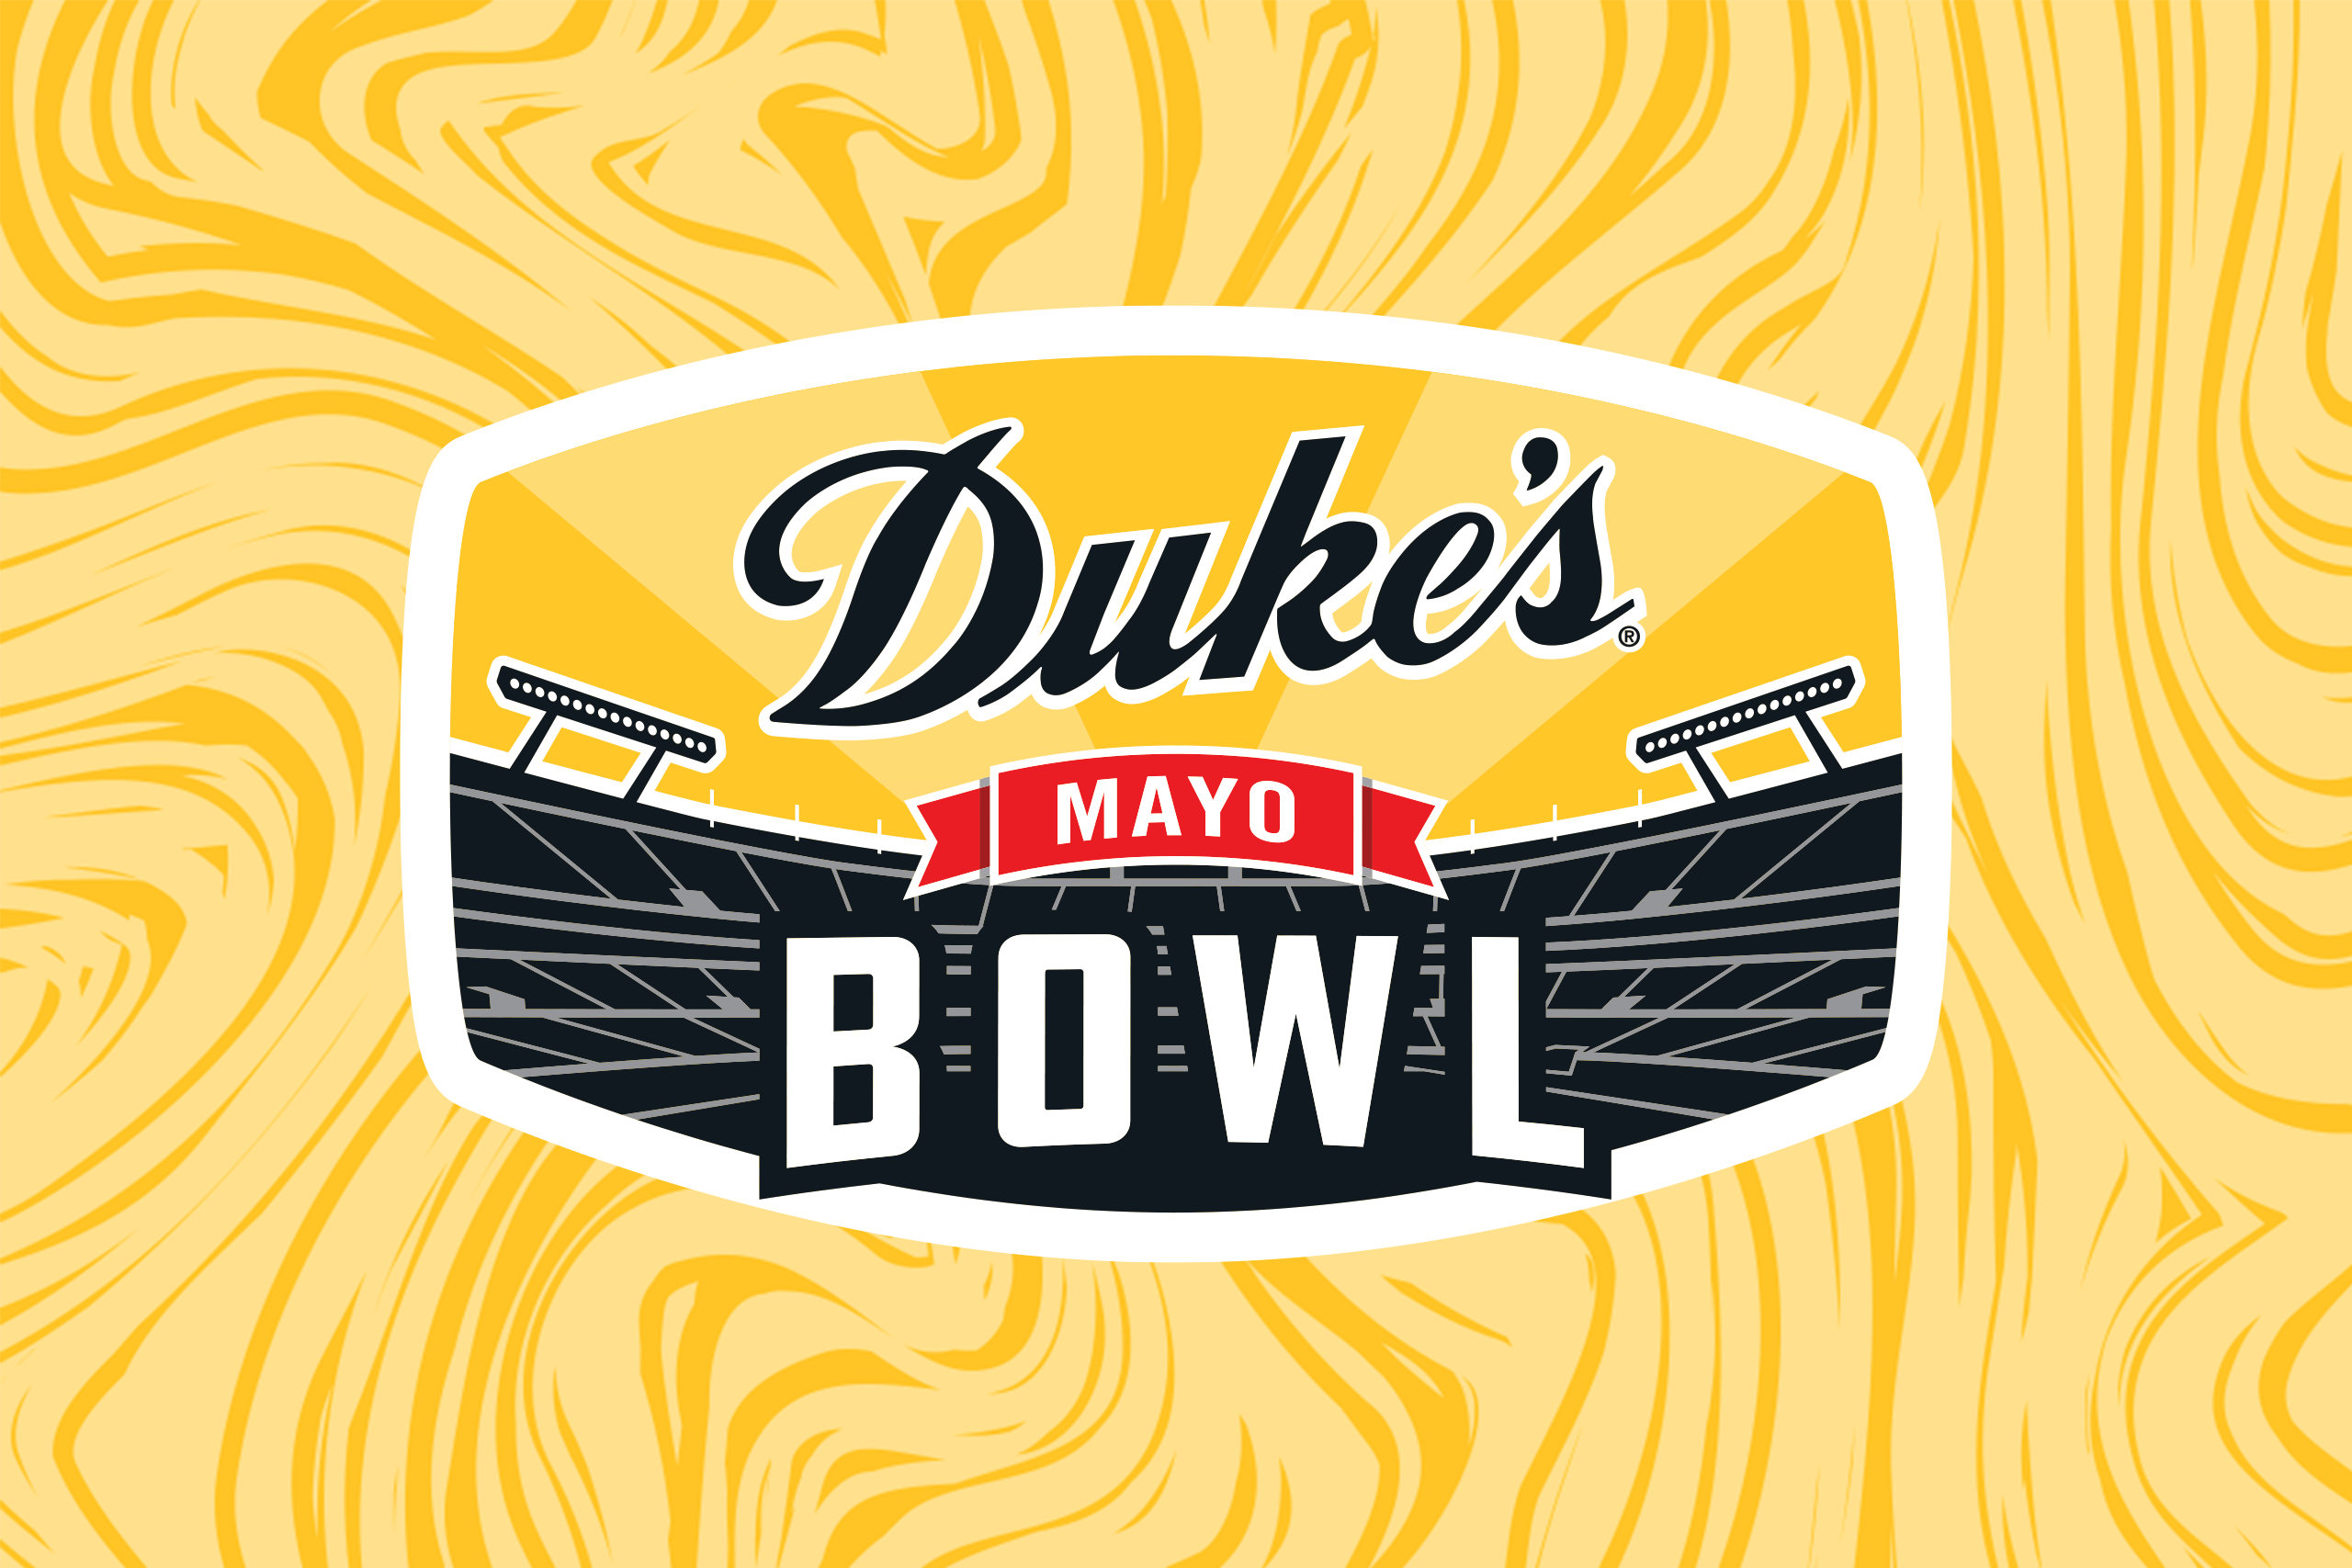 North Carolina and West Virginia to play in the 2023 Duke’s Mayo Bowl